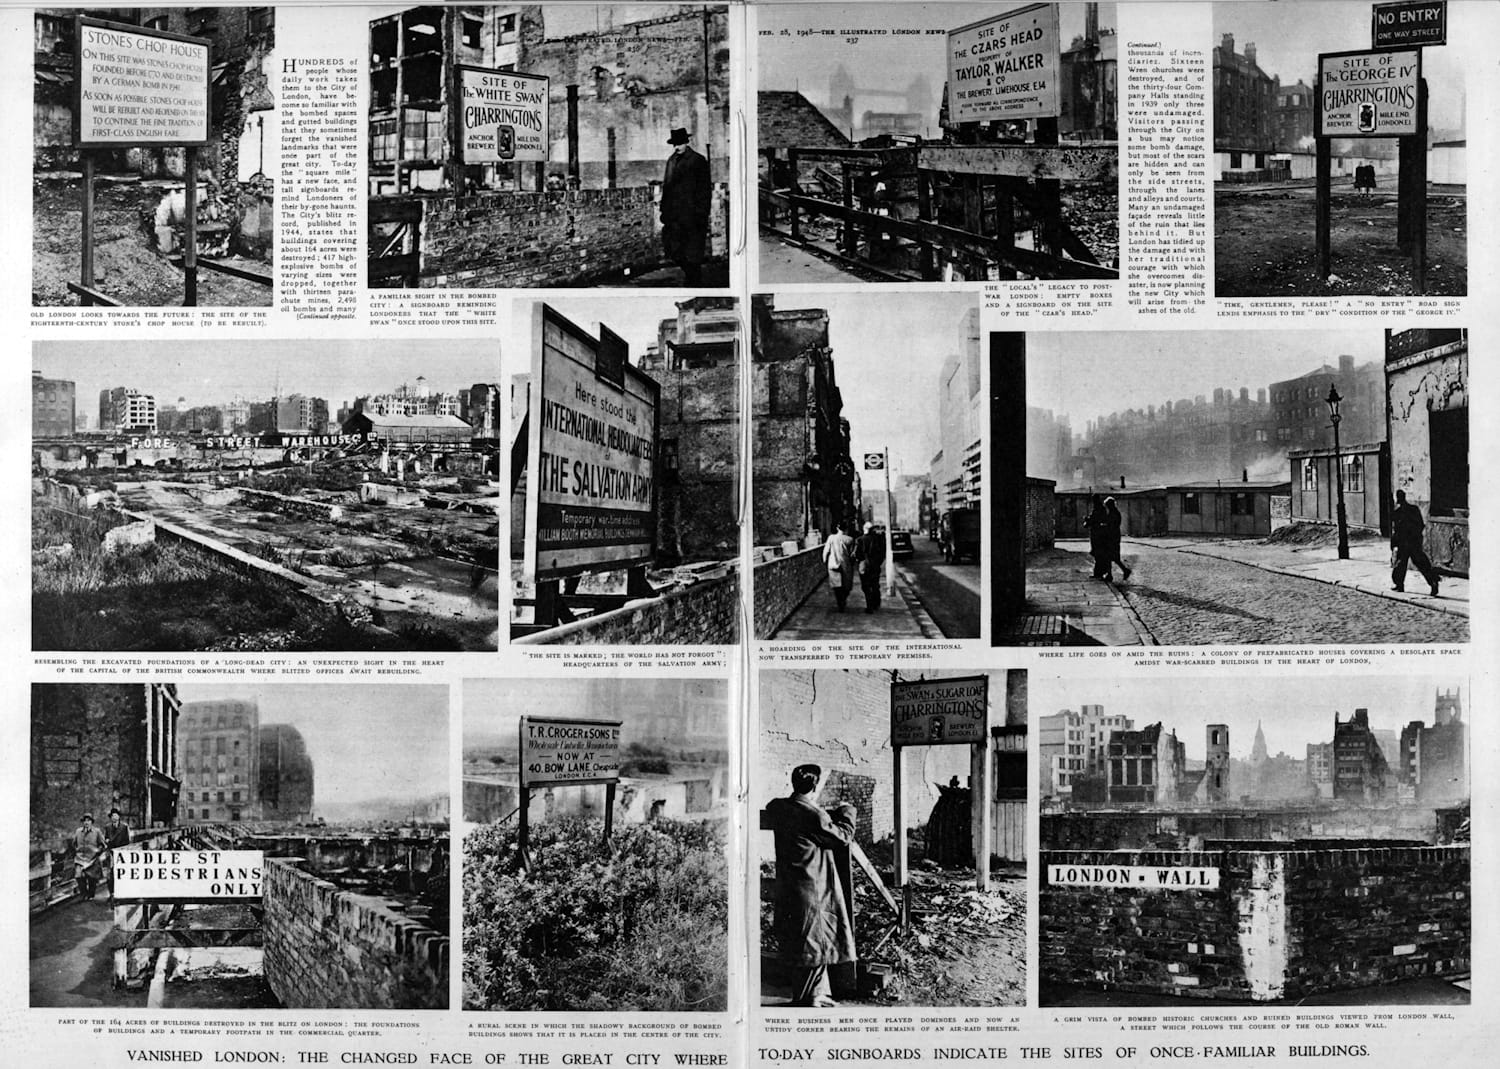 Newspaper spread with captioned black and white images showing signs erected on the sites of locations destroyed during the Blitz in London.